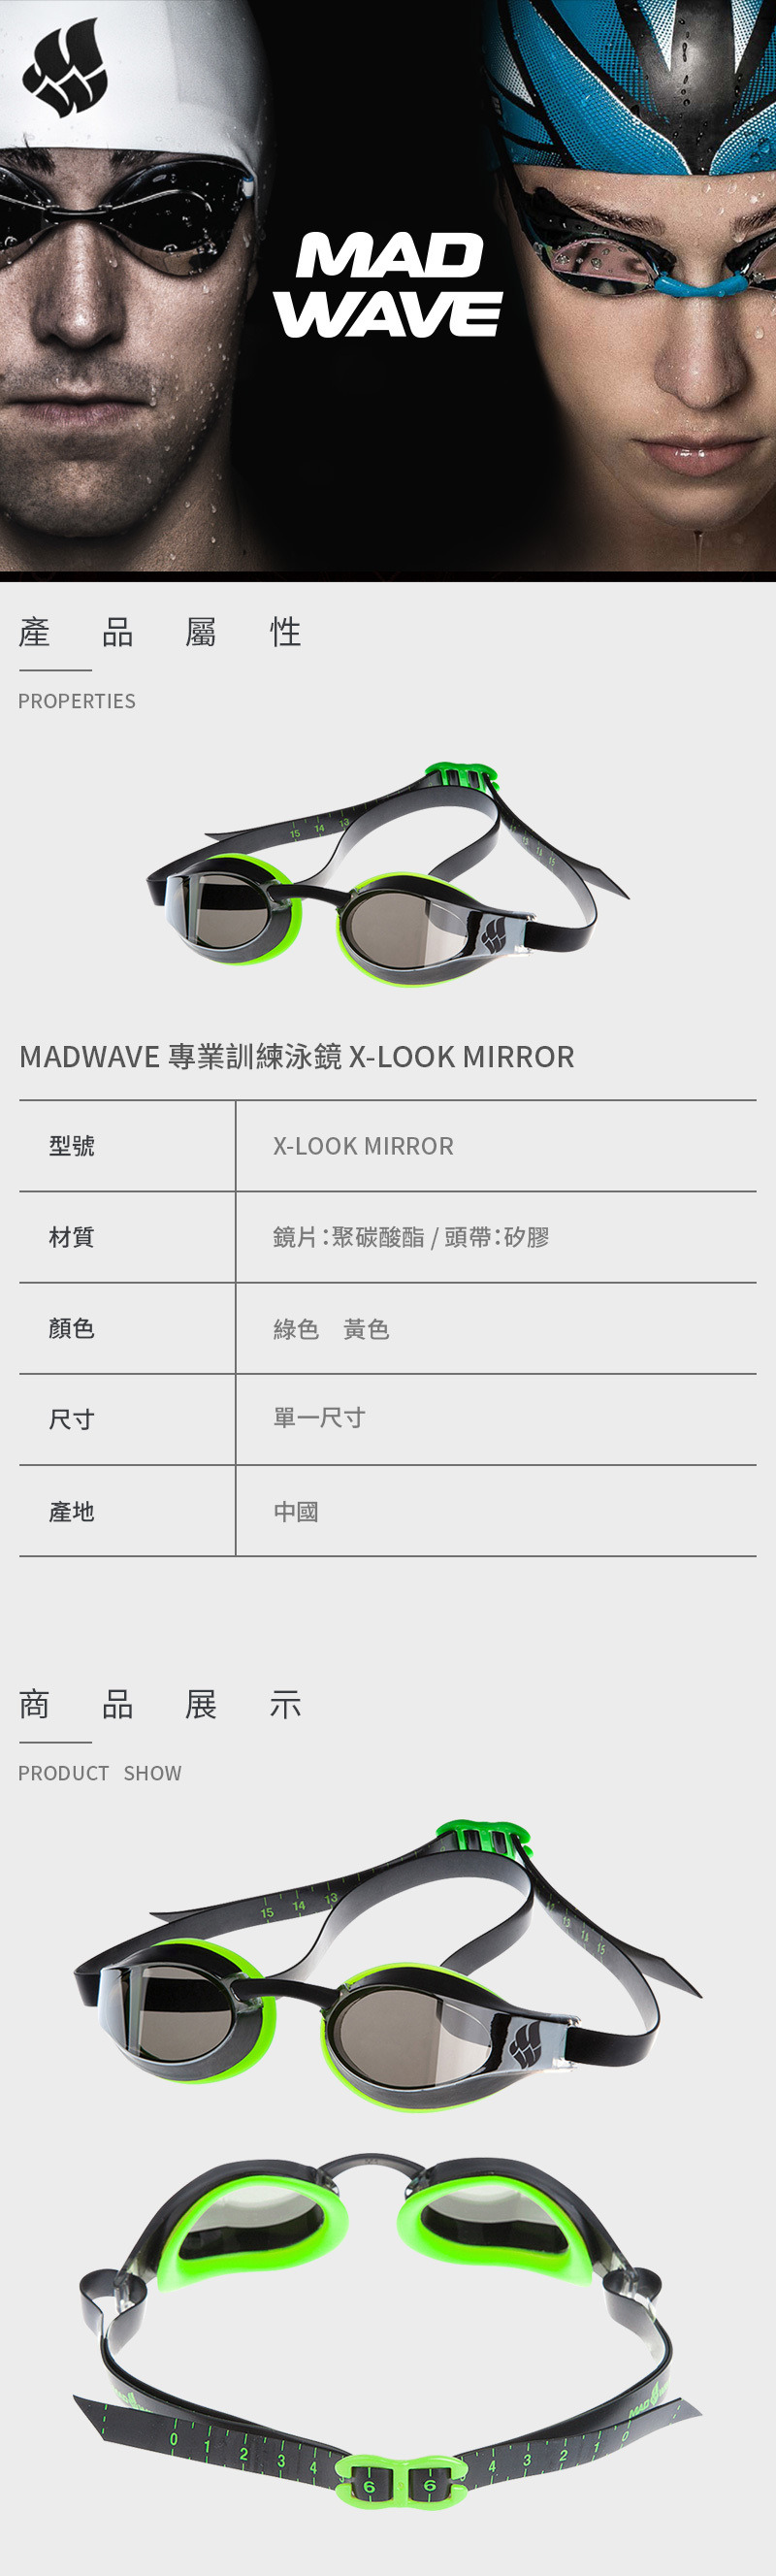 【MADWAVE】專業訓練泳鏡 X-LOOK MIRROR